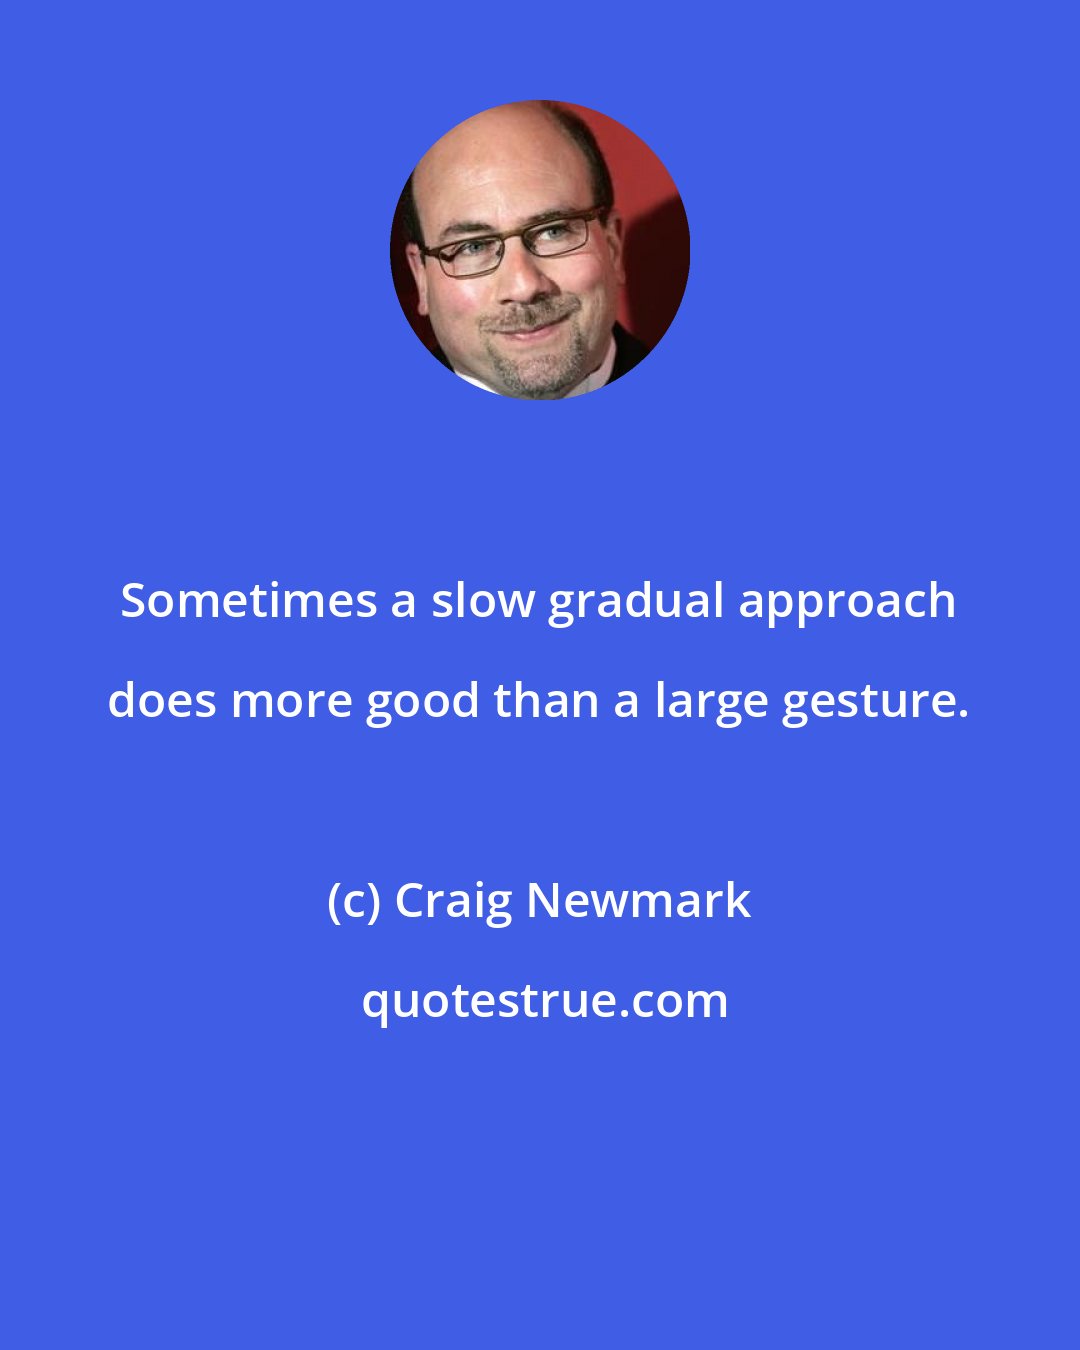 Craig Newmark: Sometimes a slow gradual approach does more good than a large gesture.